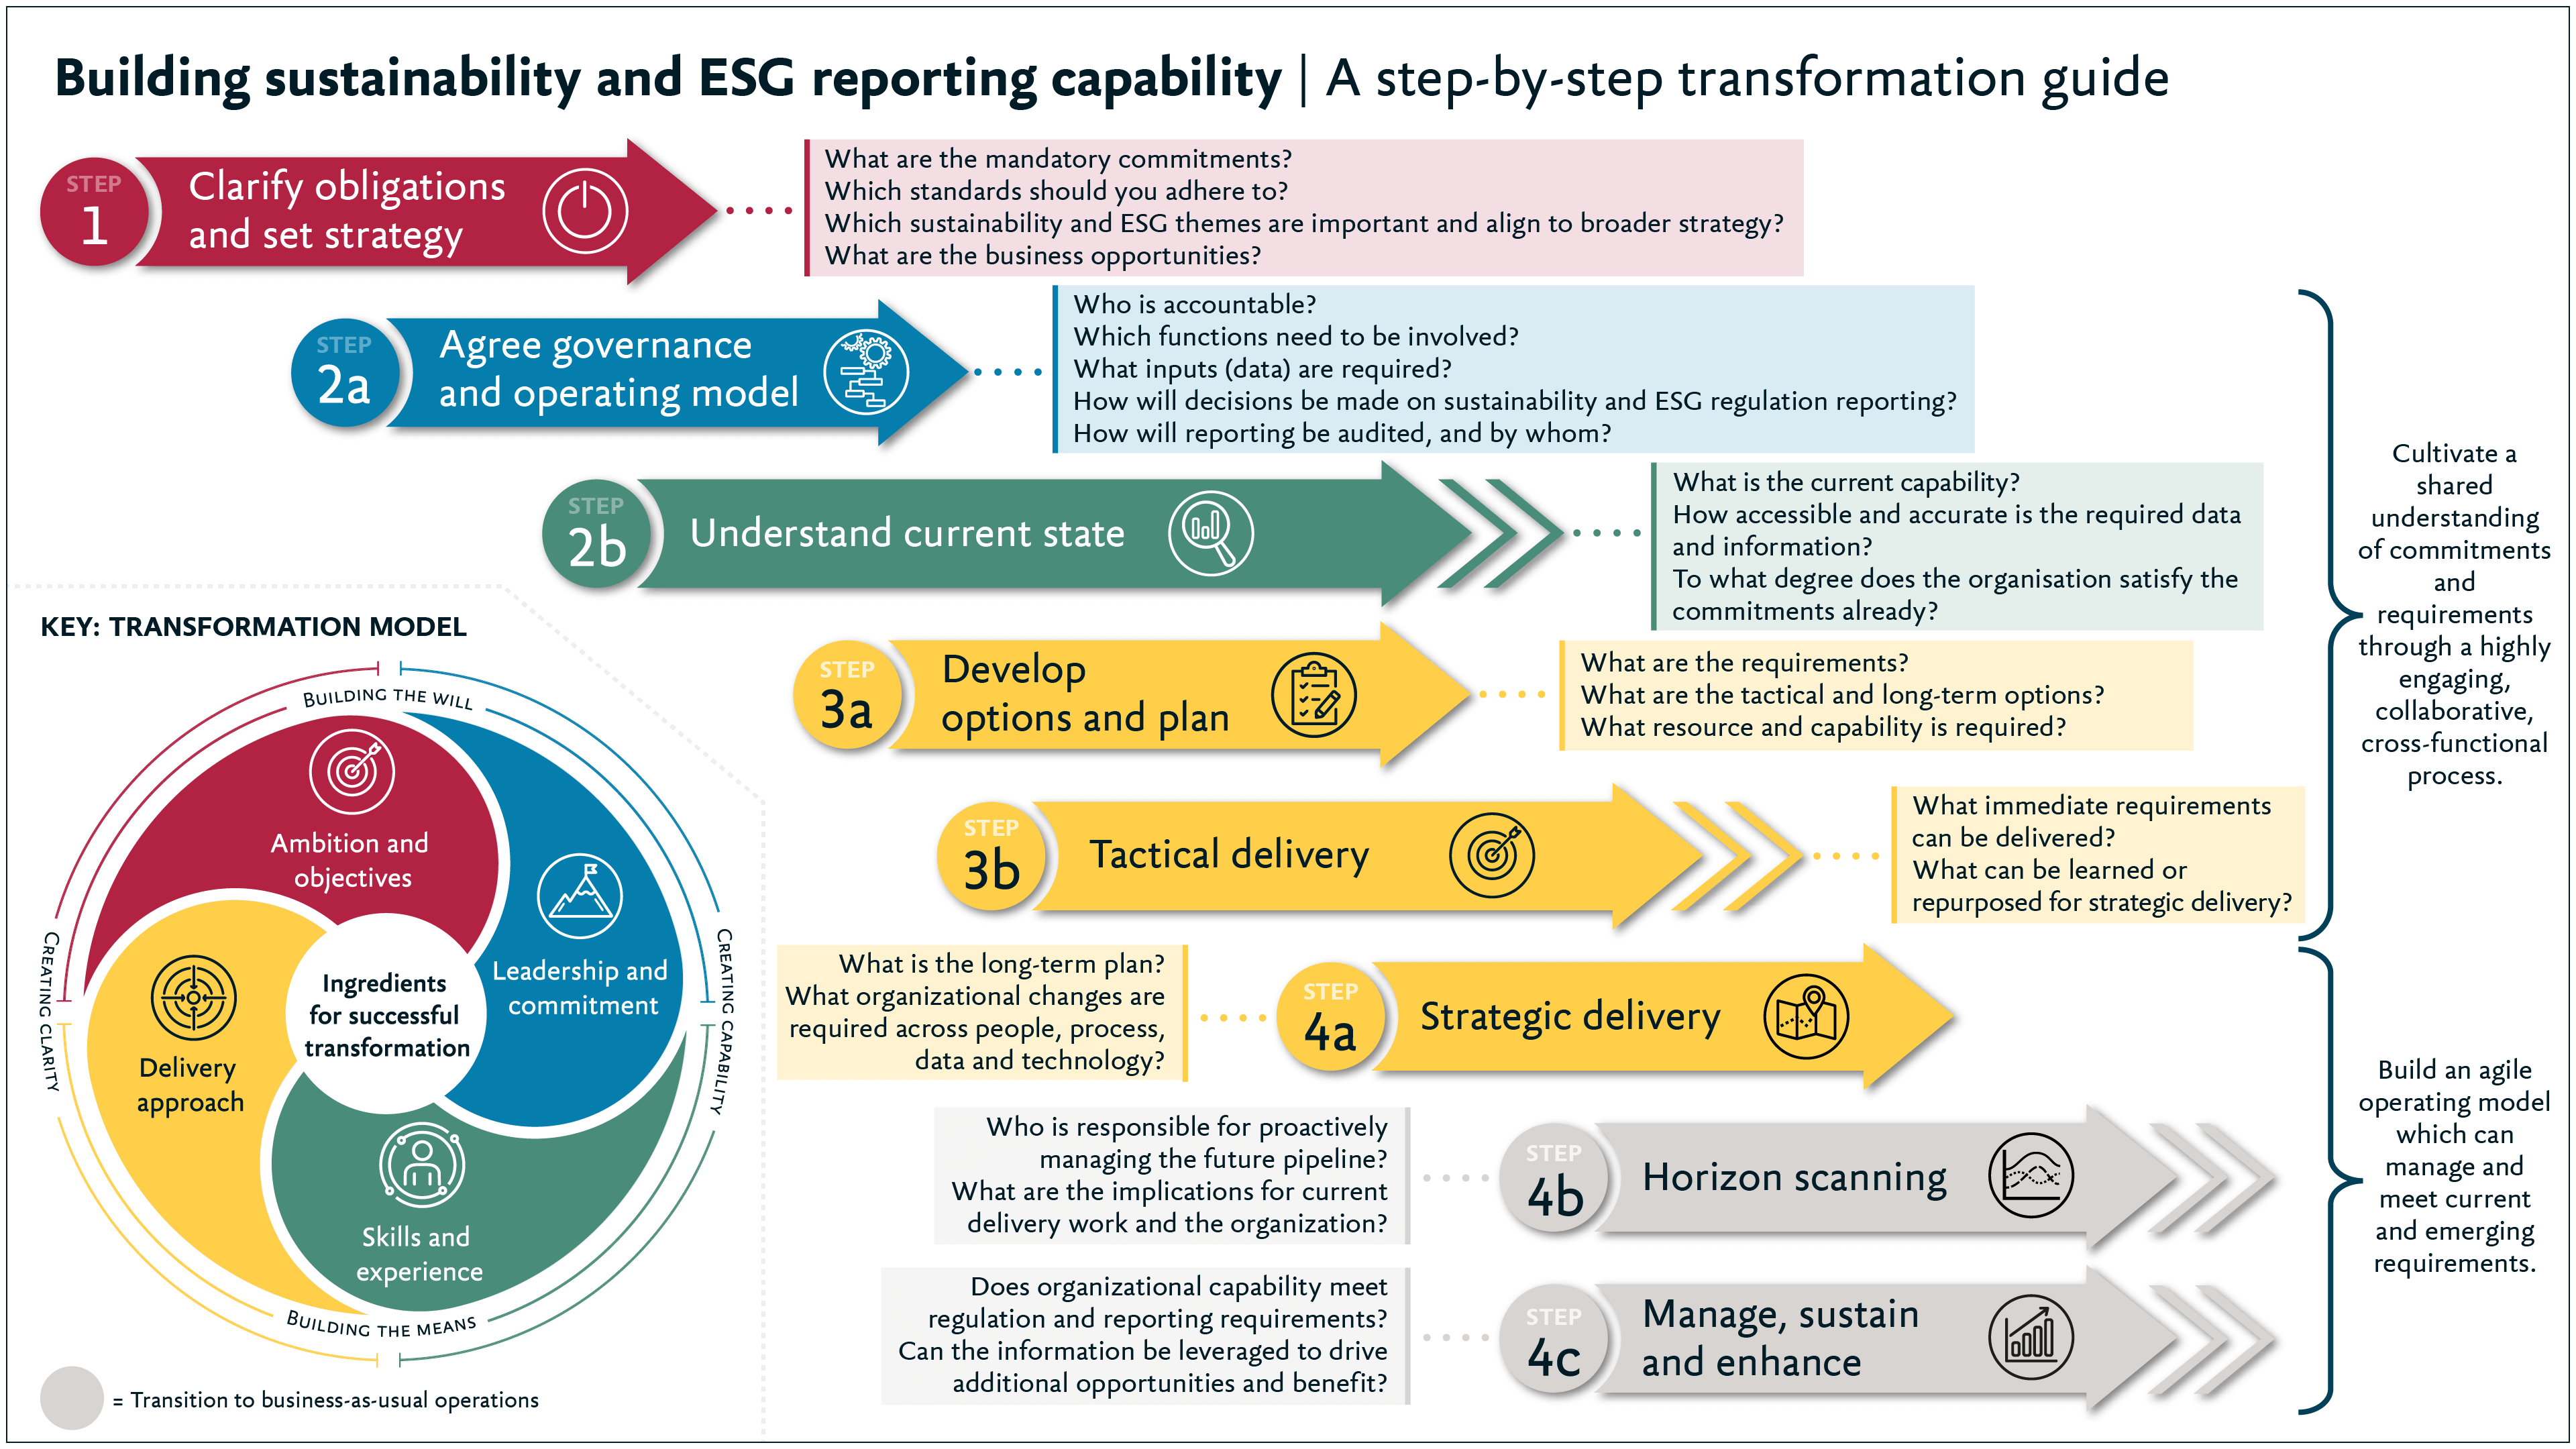 Infographic: step-by-step transformation guide for building sustainability and ESG reporting capability